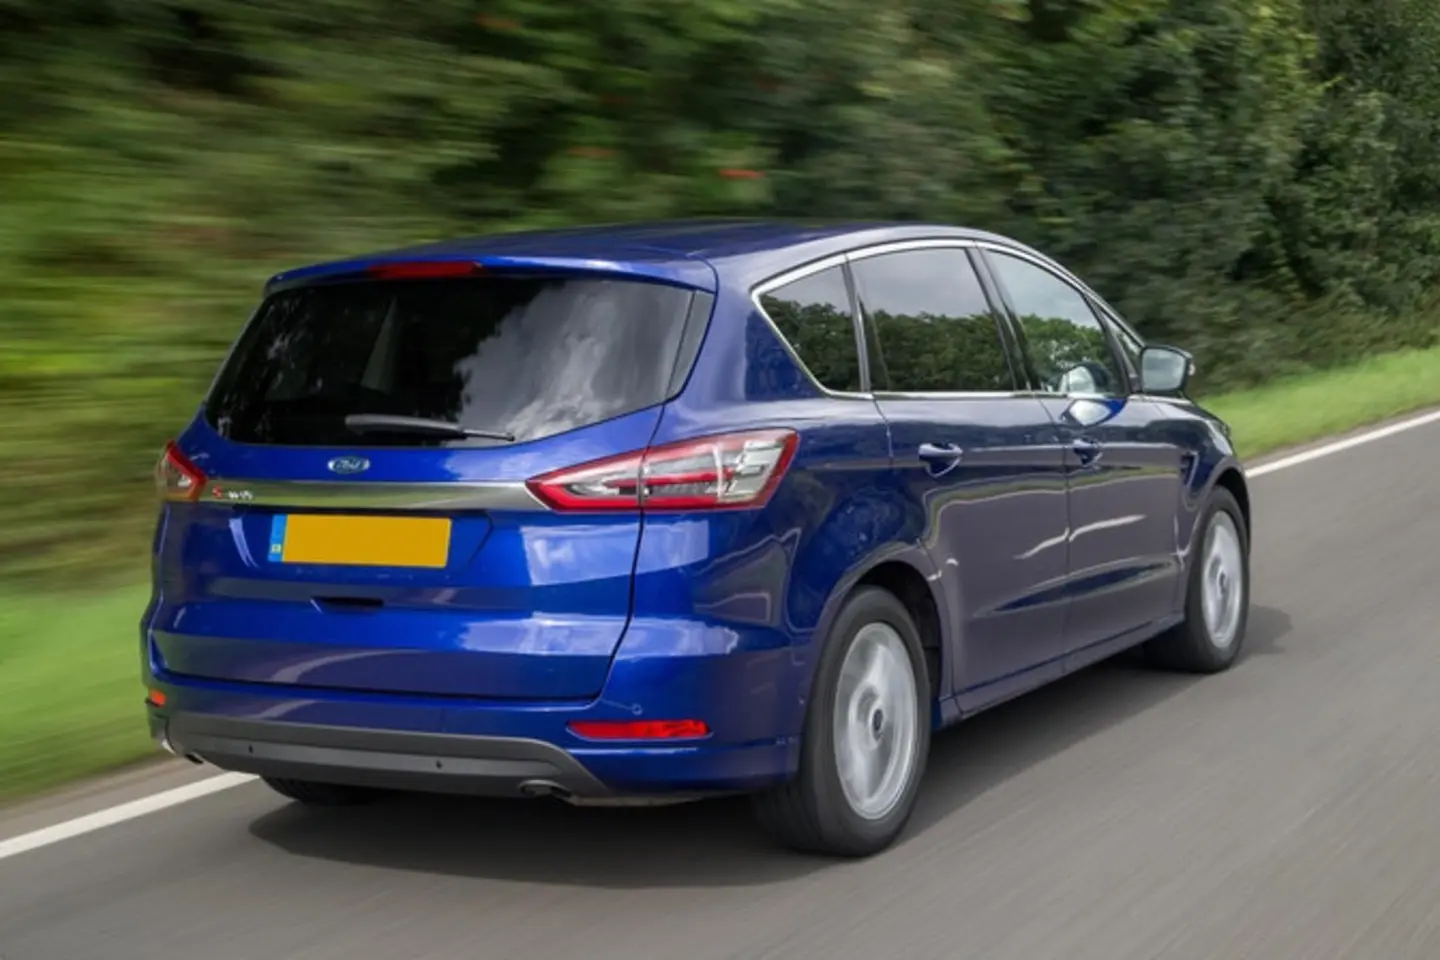 The exterior of a blue Ford S-Max